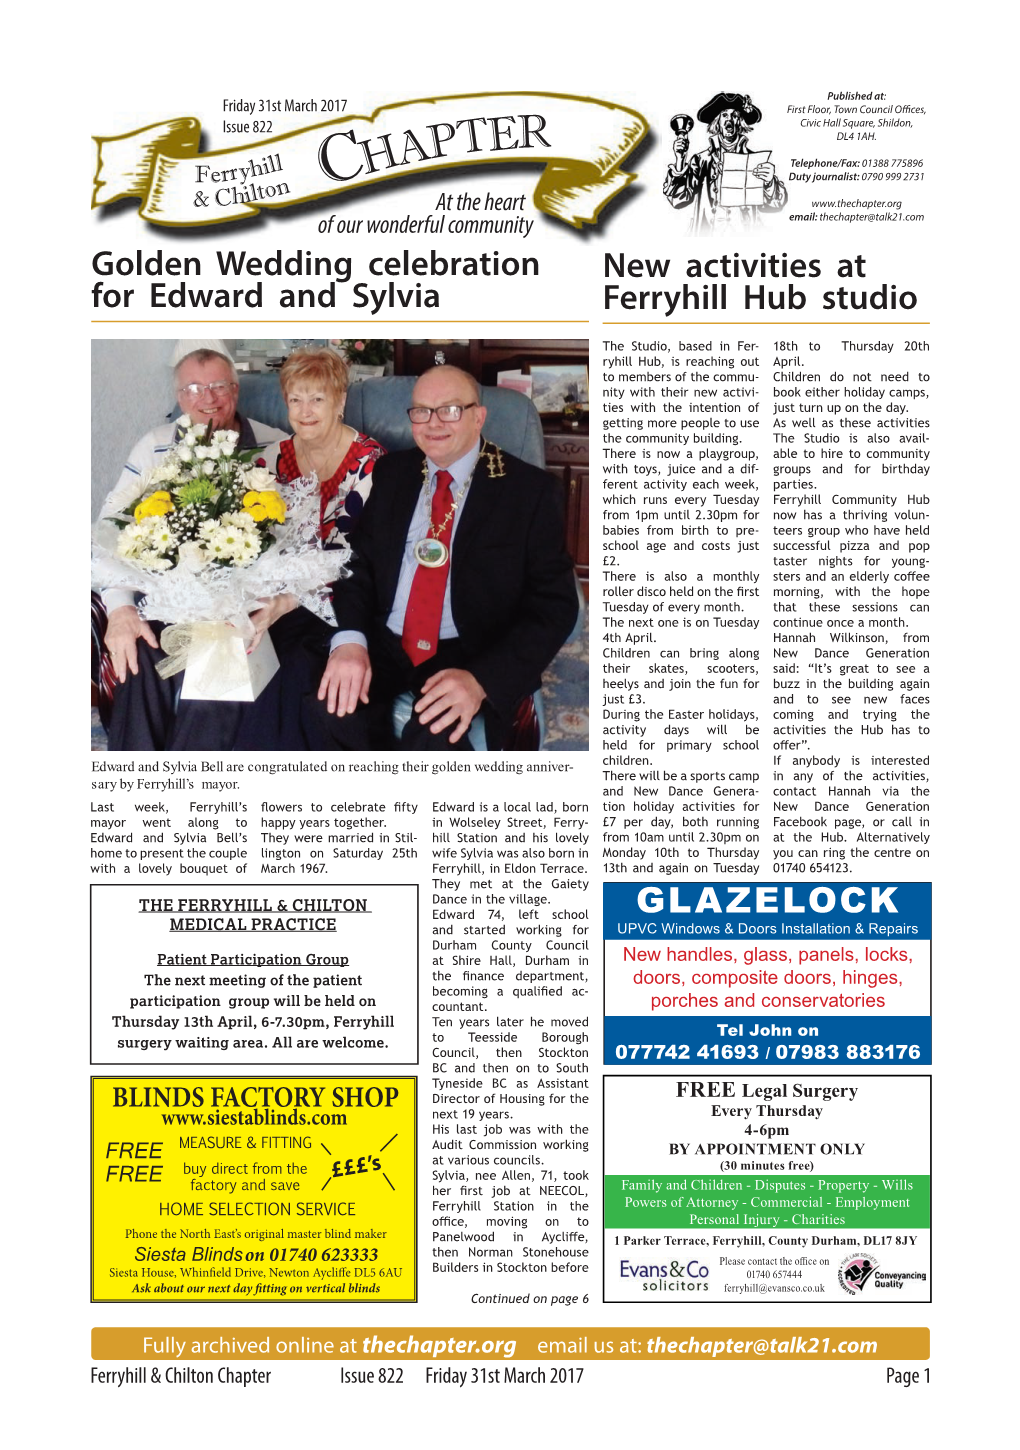 Chapter.Org of Our Wonderful Community Email: Thechapter@Talk21.Com Golden Wedding Celebration New Activities at for Edward and Sylvia Ferryhill Hub Studio